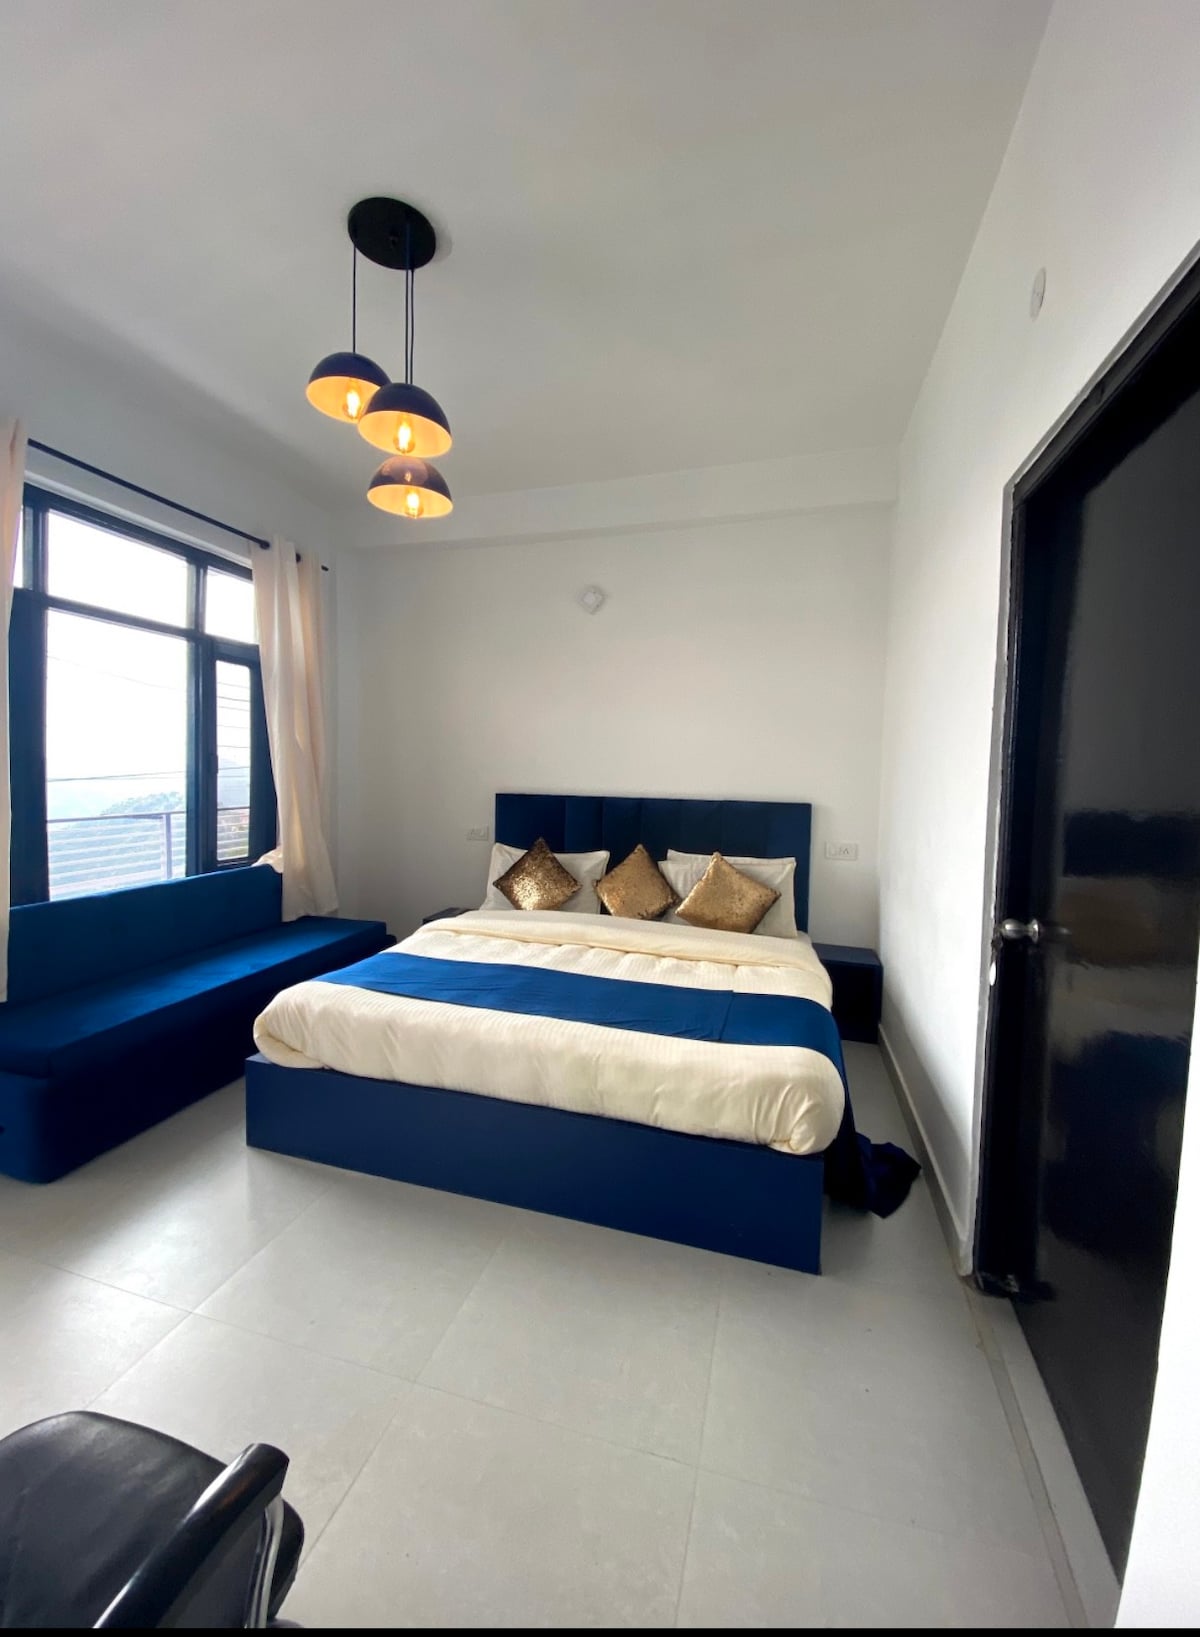 Parimahal homestay blueberry family suite